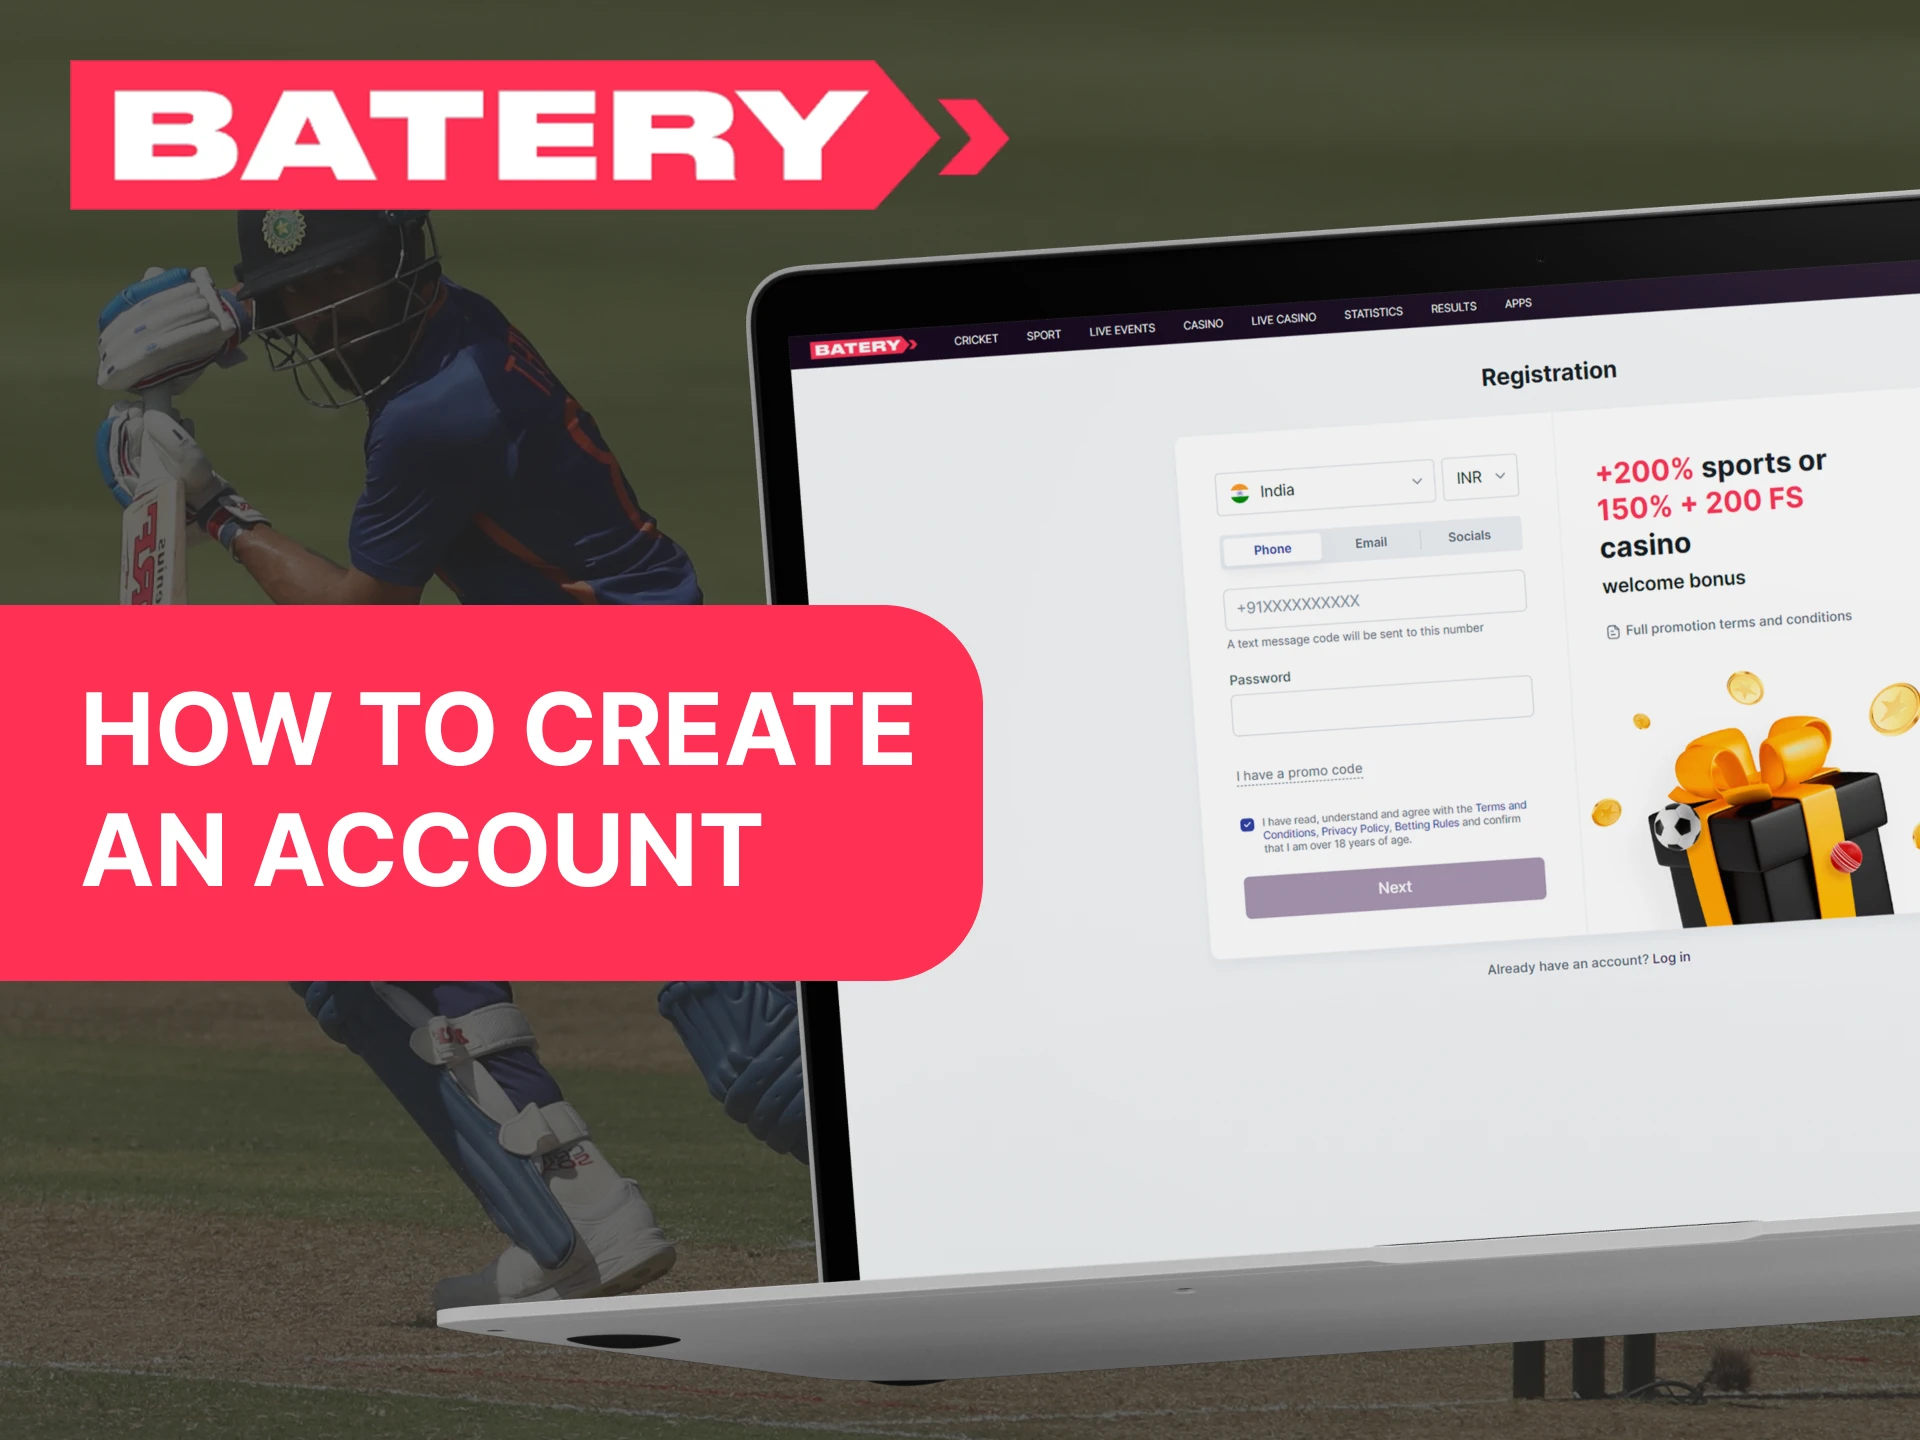 Creating an account with Batery is easy.